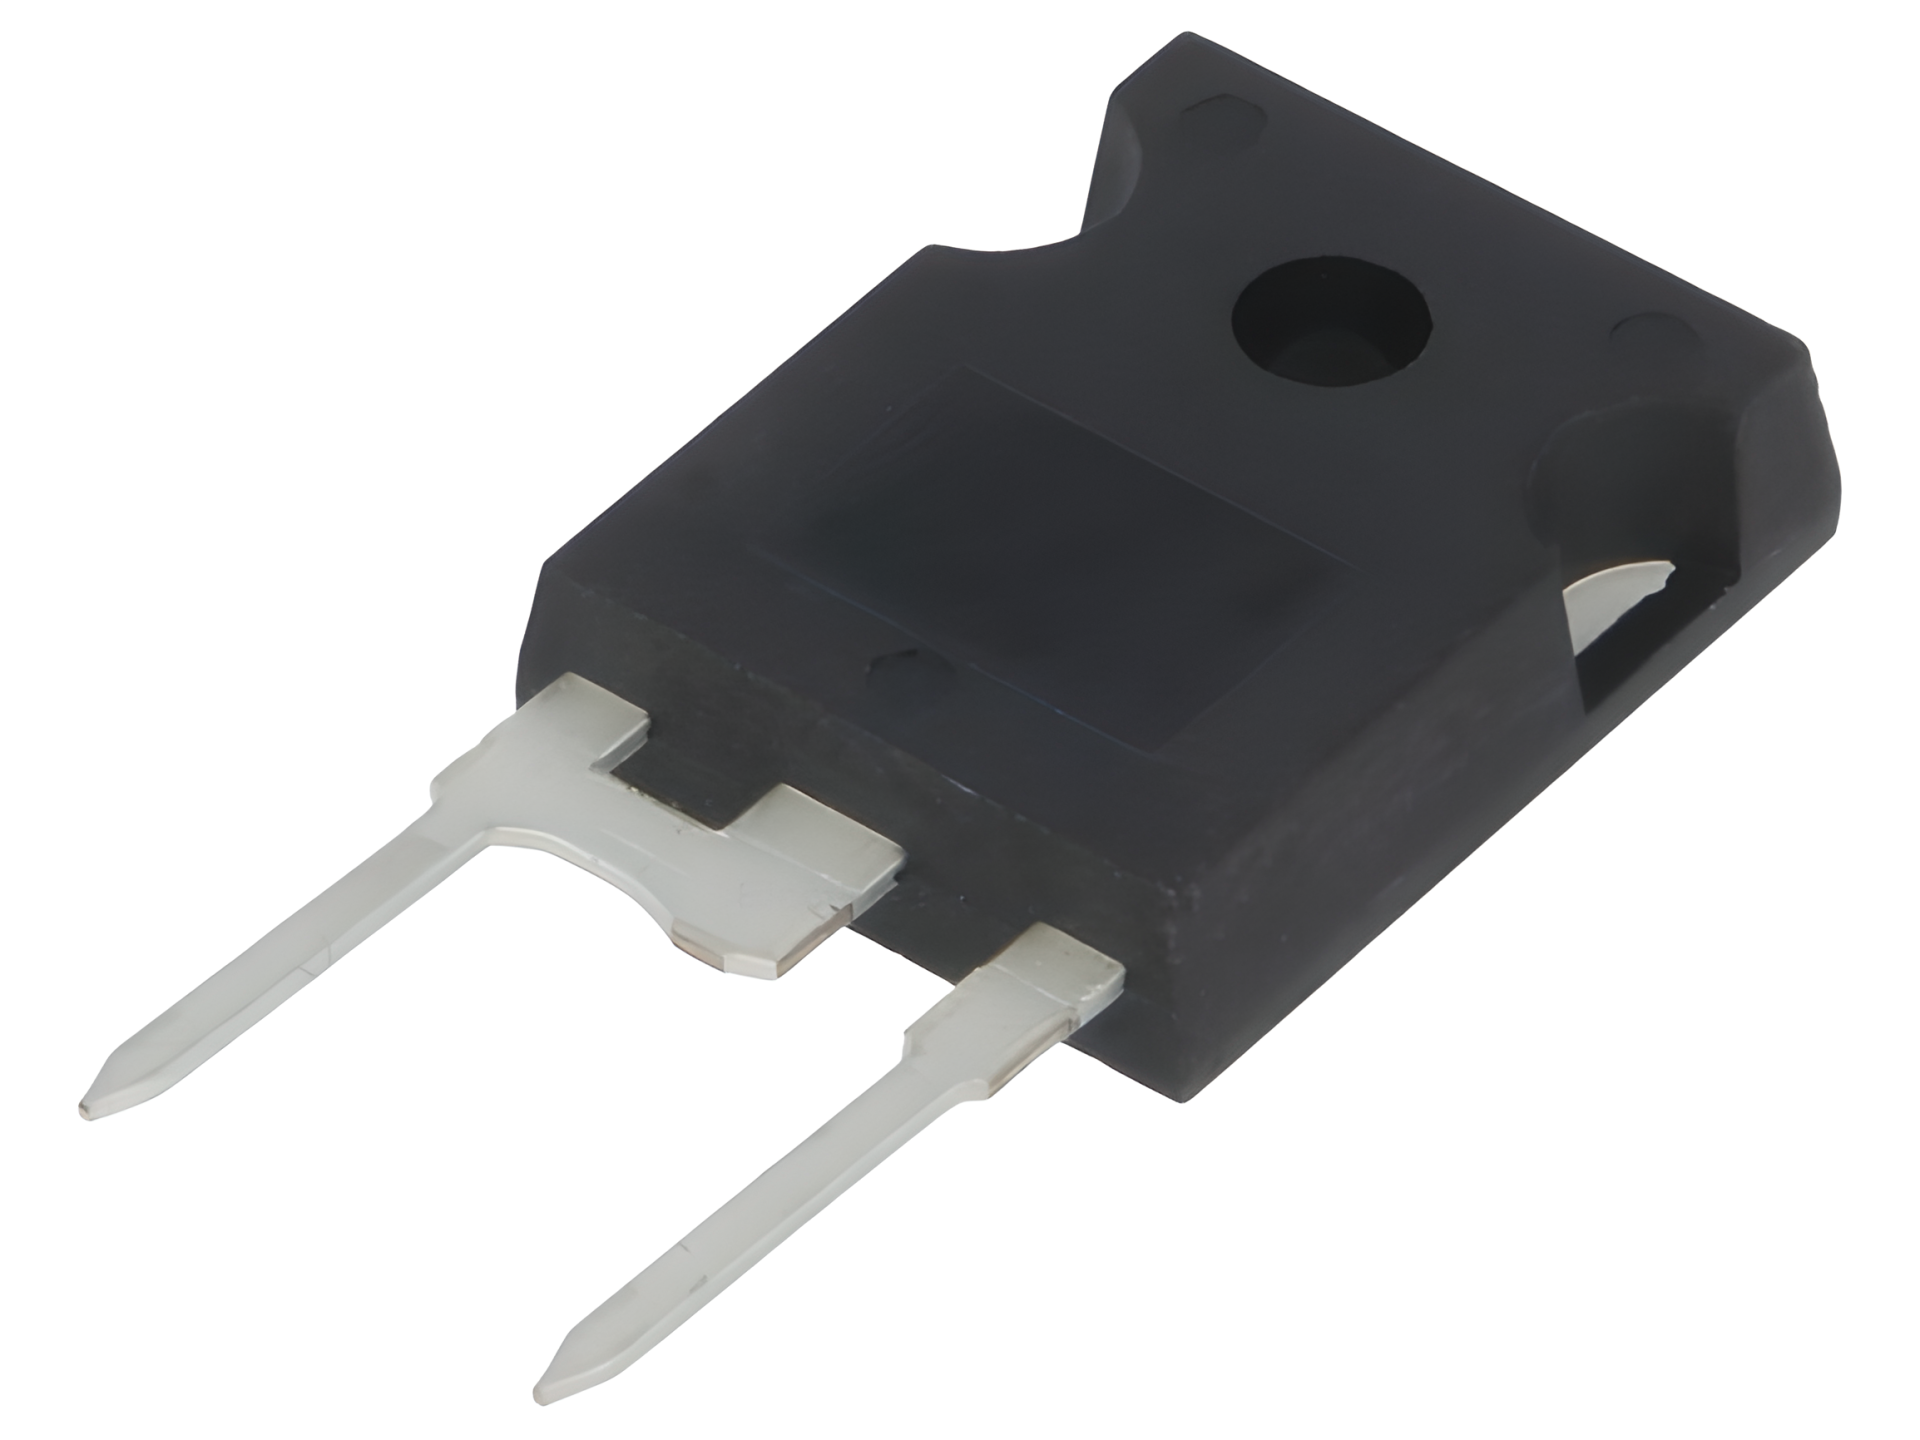 DSI45-16A   TO-247-2   45A 1600V  Standard Rectifier Diode